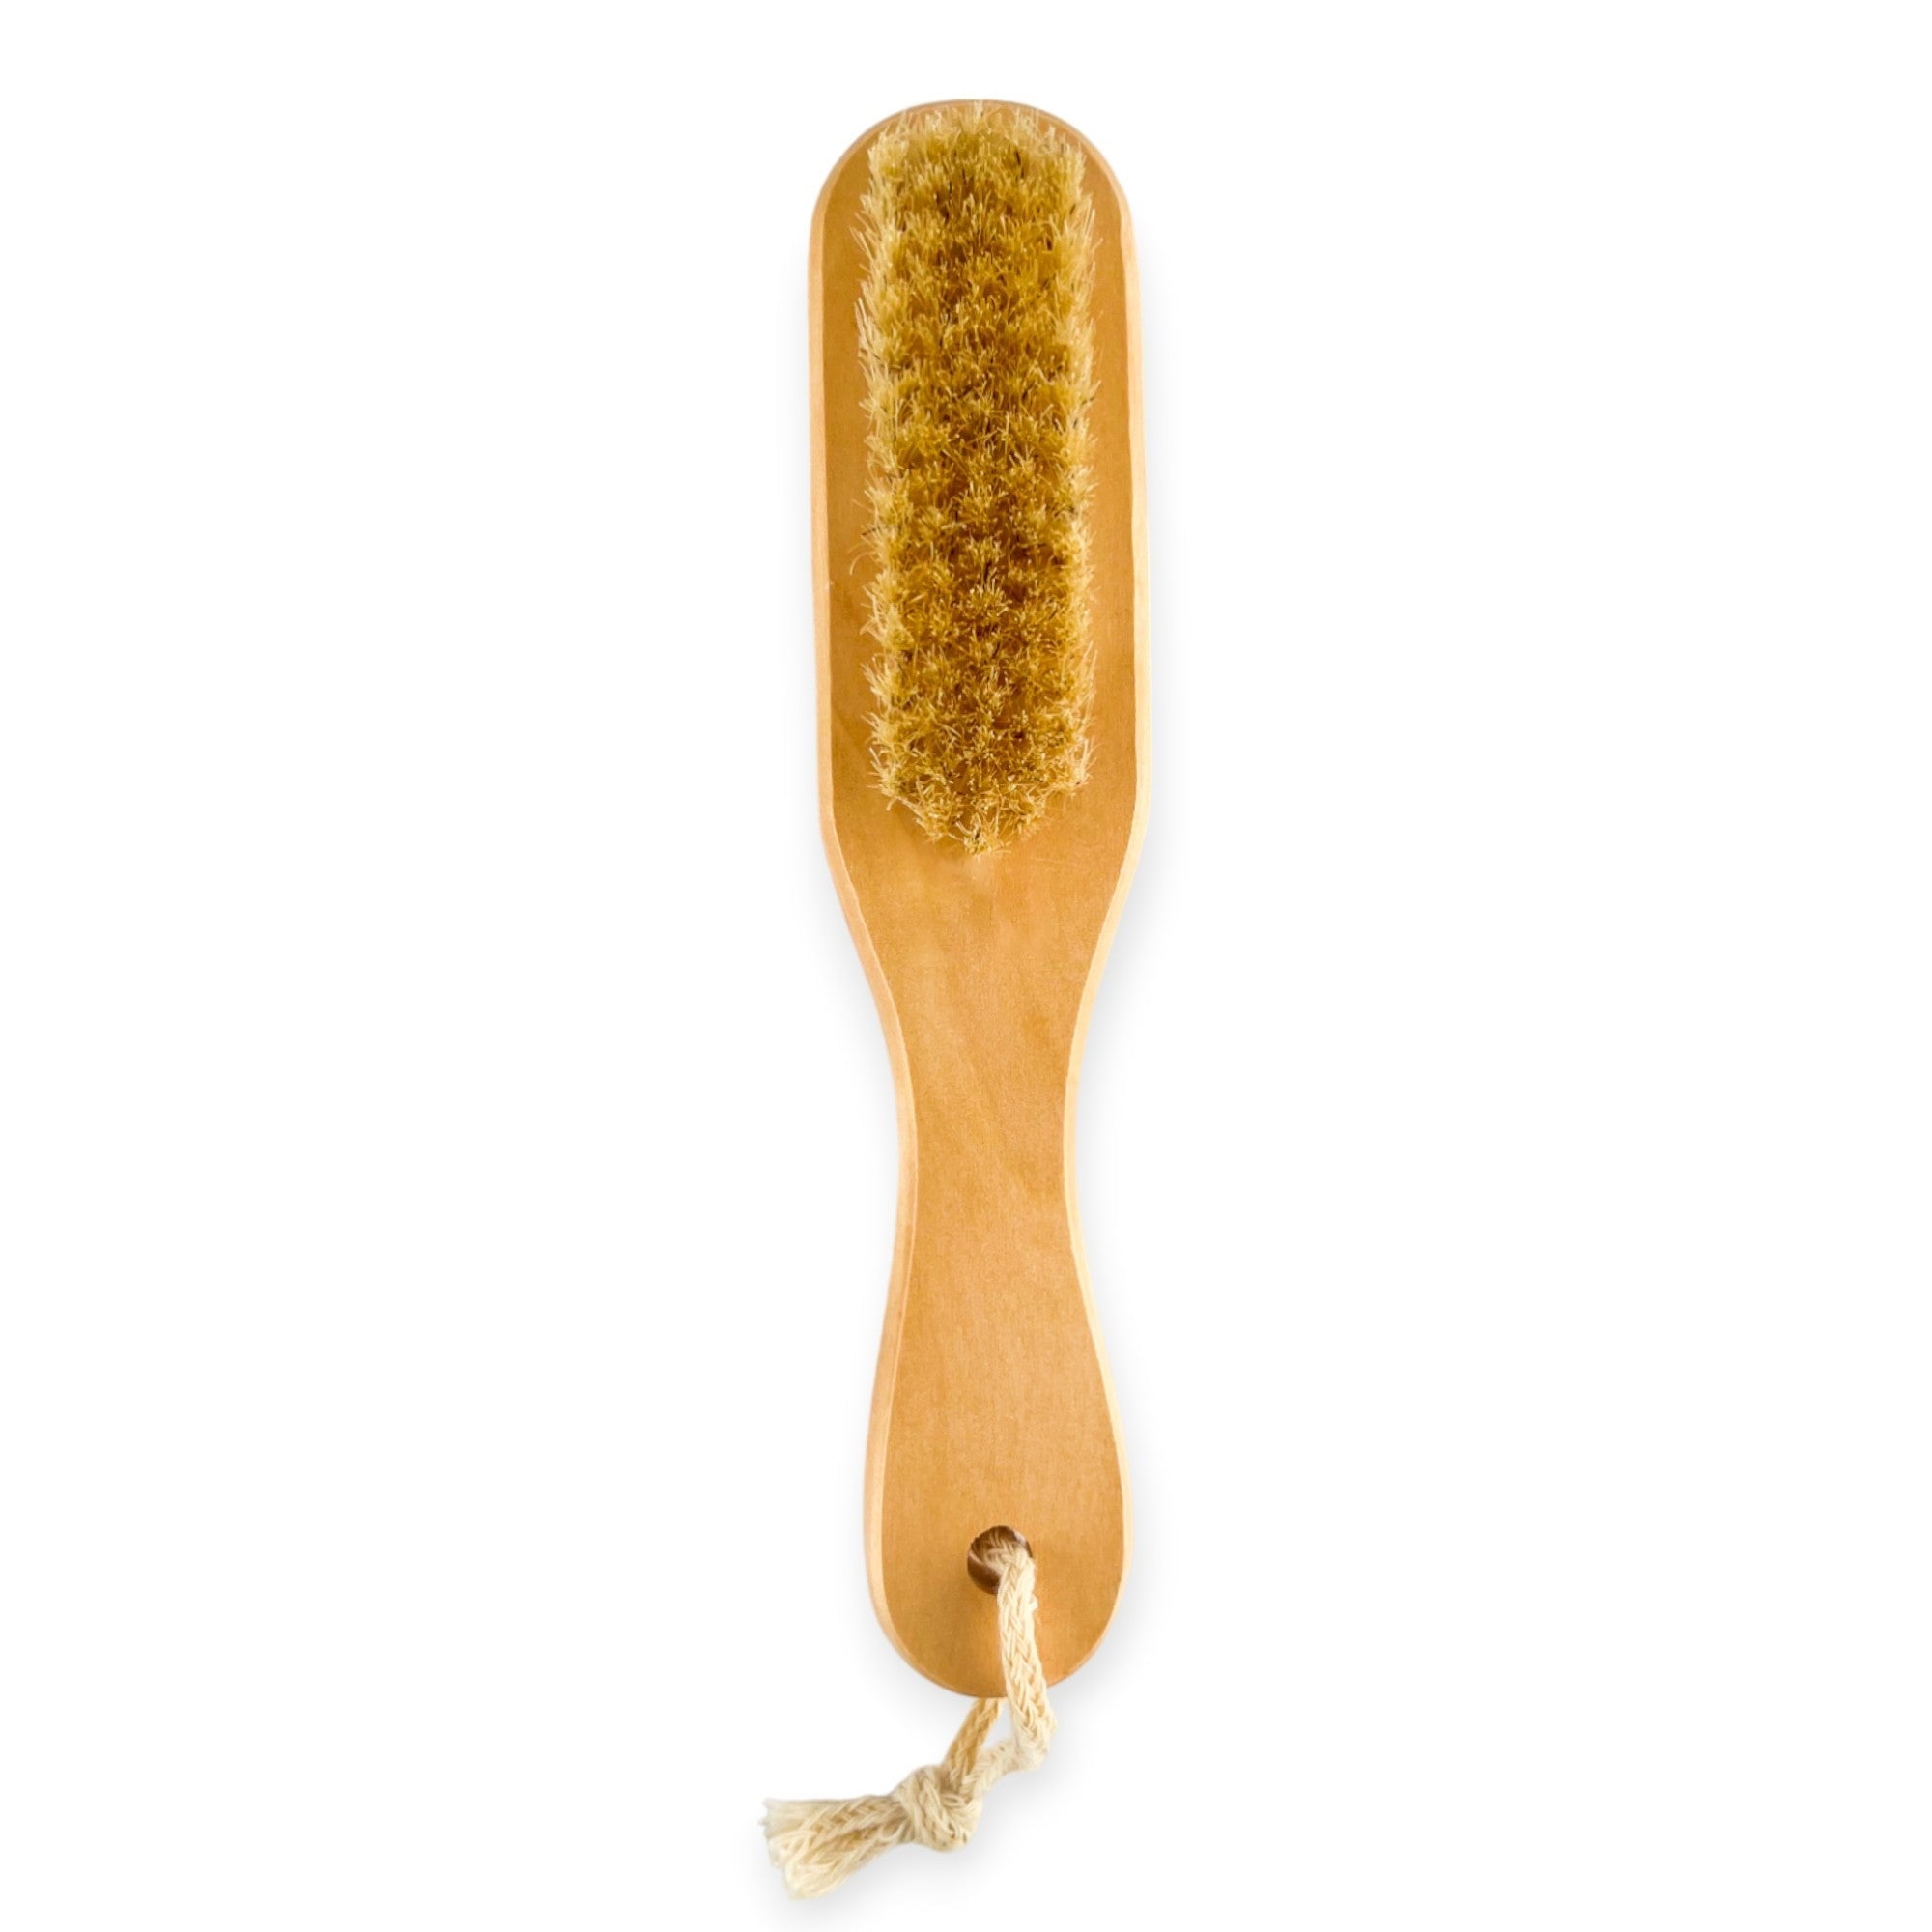 Wooden Pumice Brush with Handle - Old Town Soap Co.